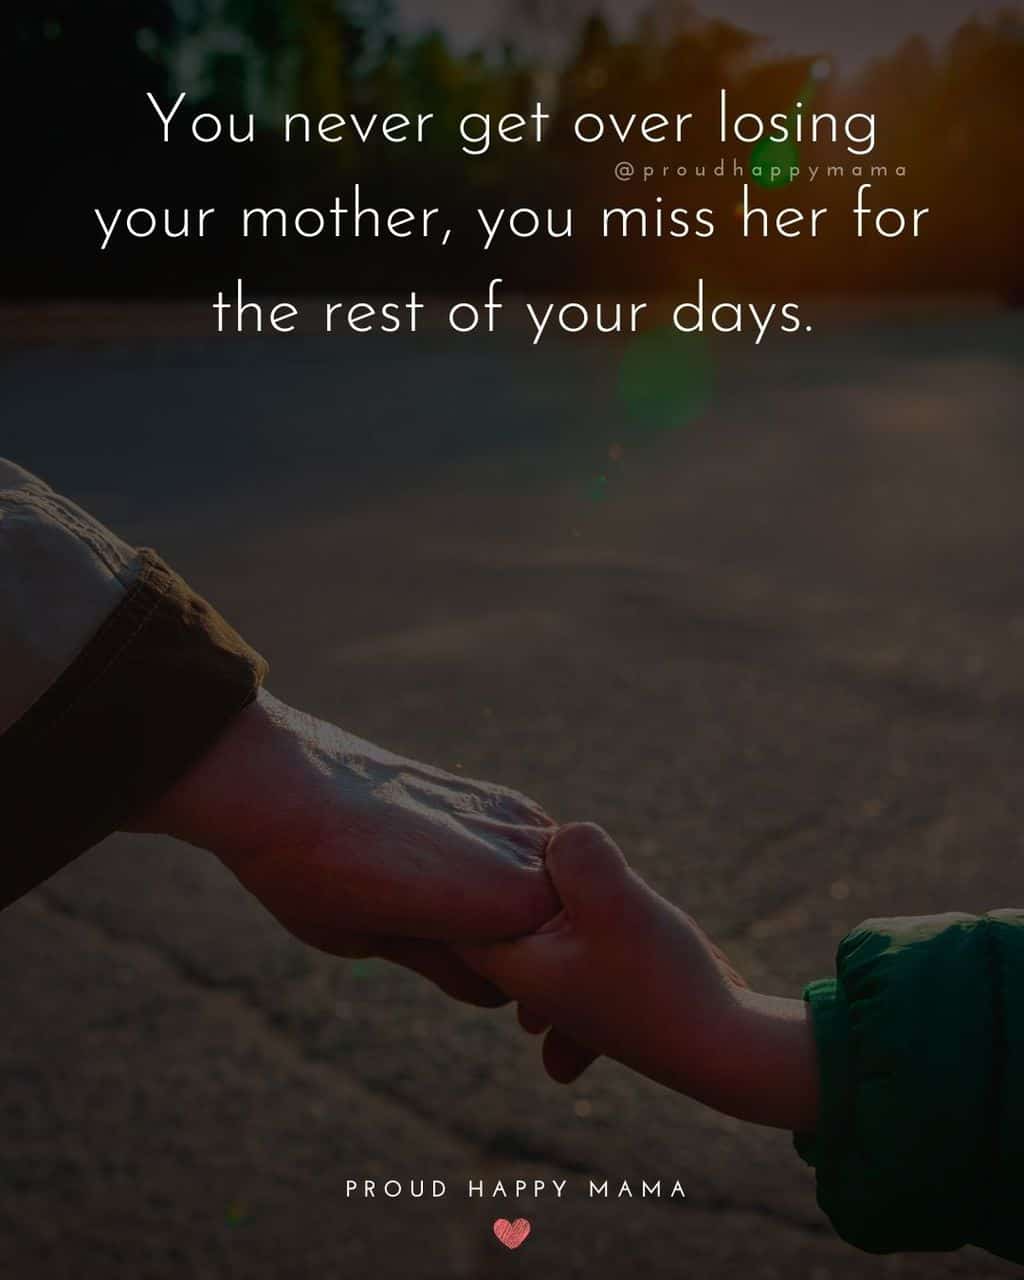 Mother letting go of child's hand. With text overlay, '‘You never get over losing your mother, you miss her for the rest of your days.’